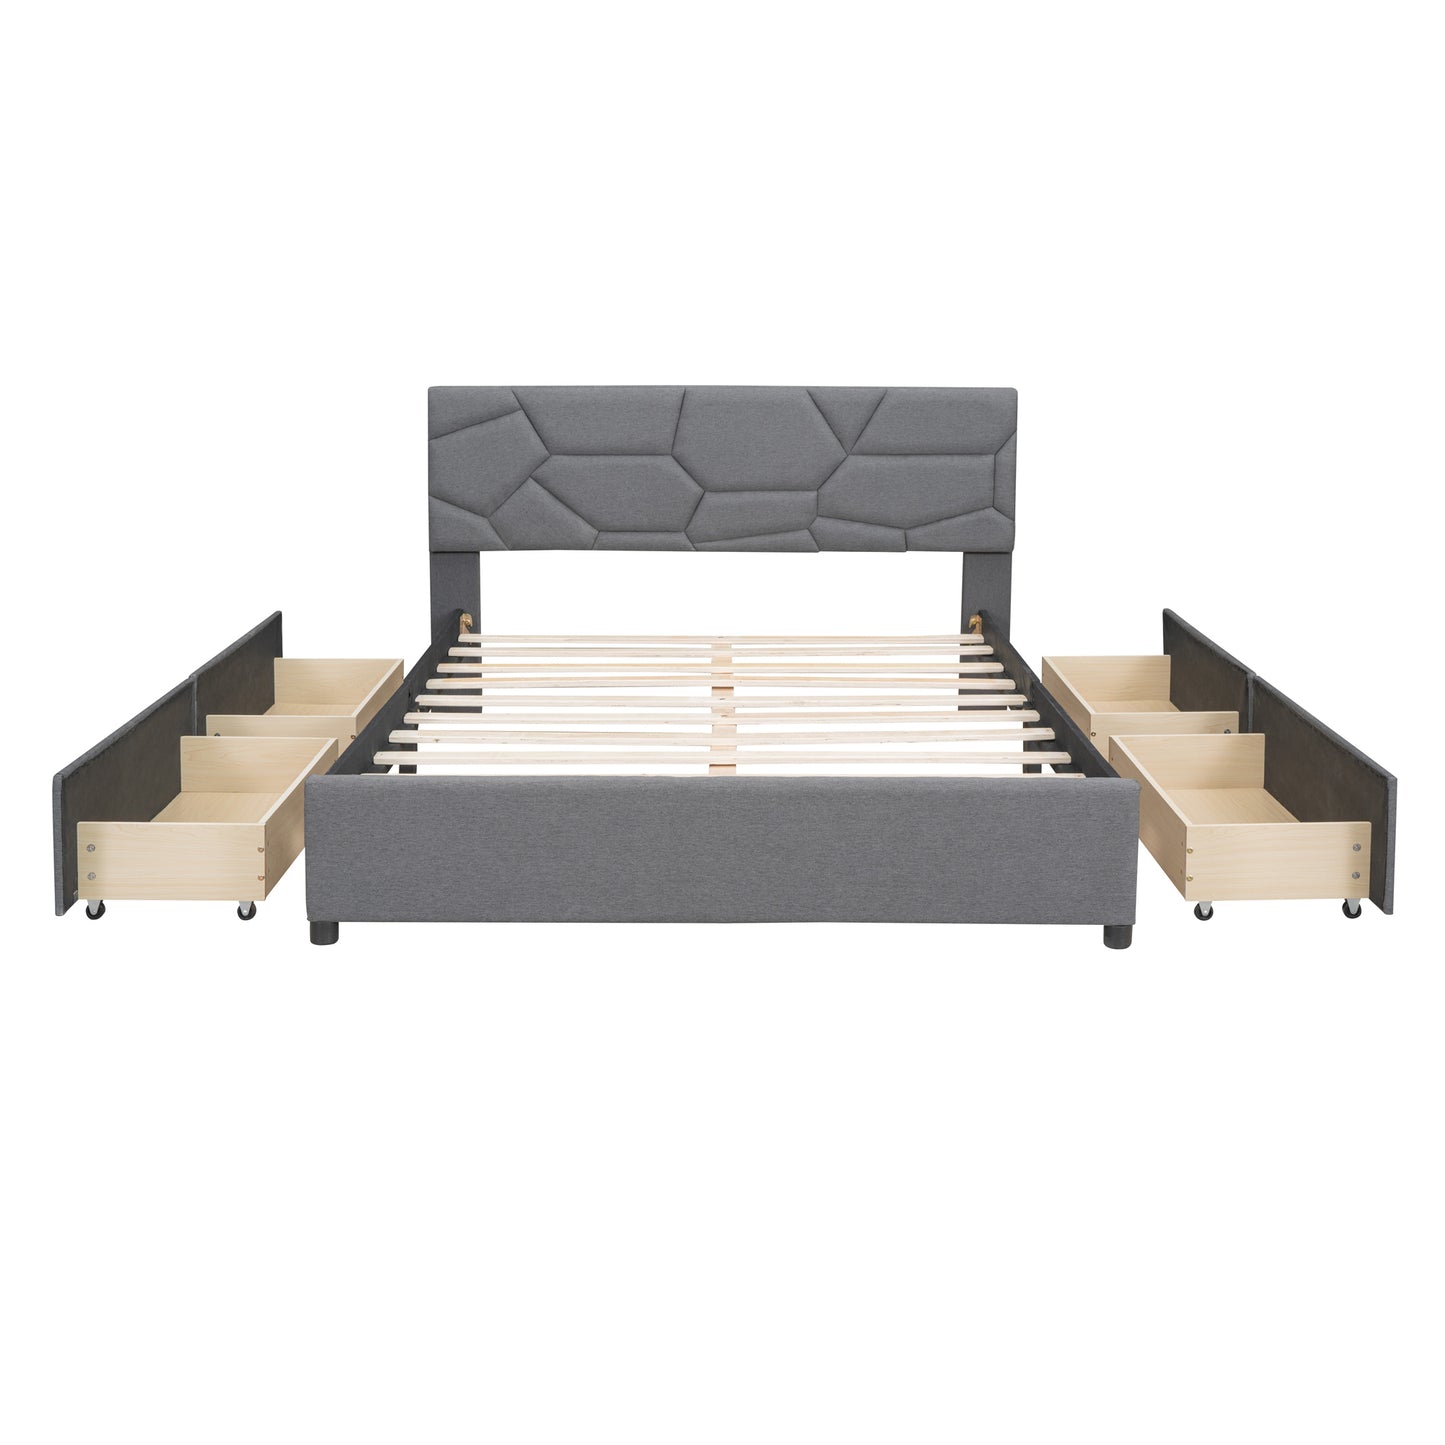 Queen Size Upholstered Platform Bed with Brick Pattern Headboard and 4 Drawers, Linen Fabric, Gray